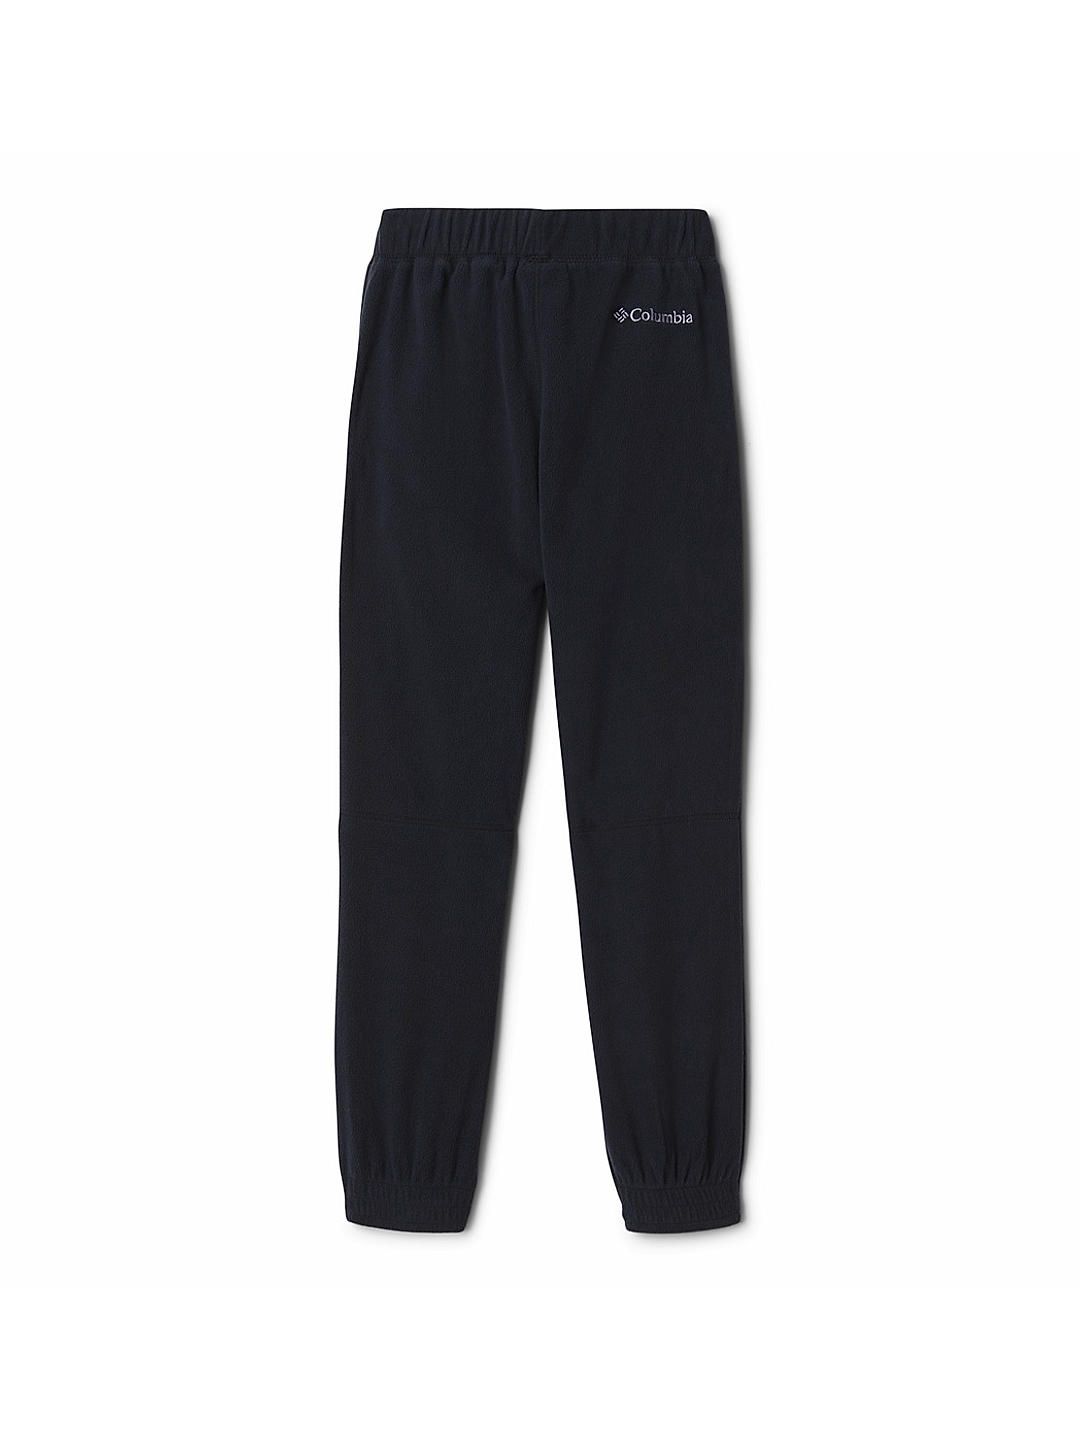 Buy Black Trousers & Pants for Boys by THE CHILDREN'S PLACE Online |  Ajio.com